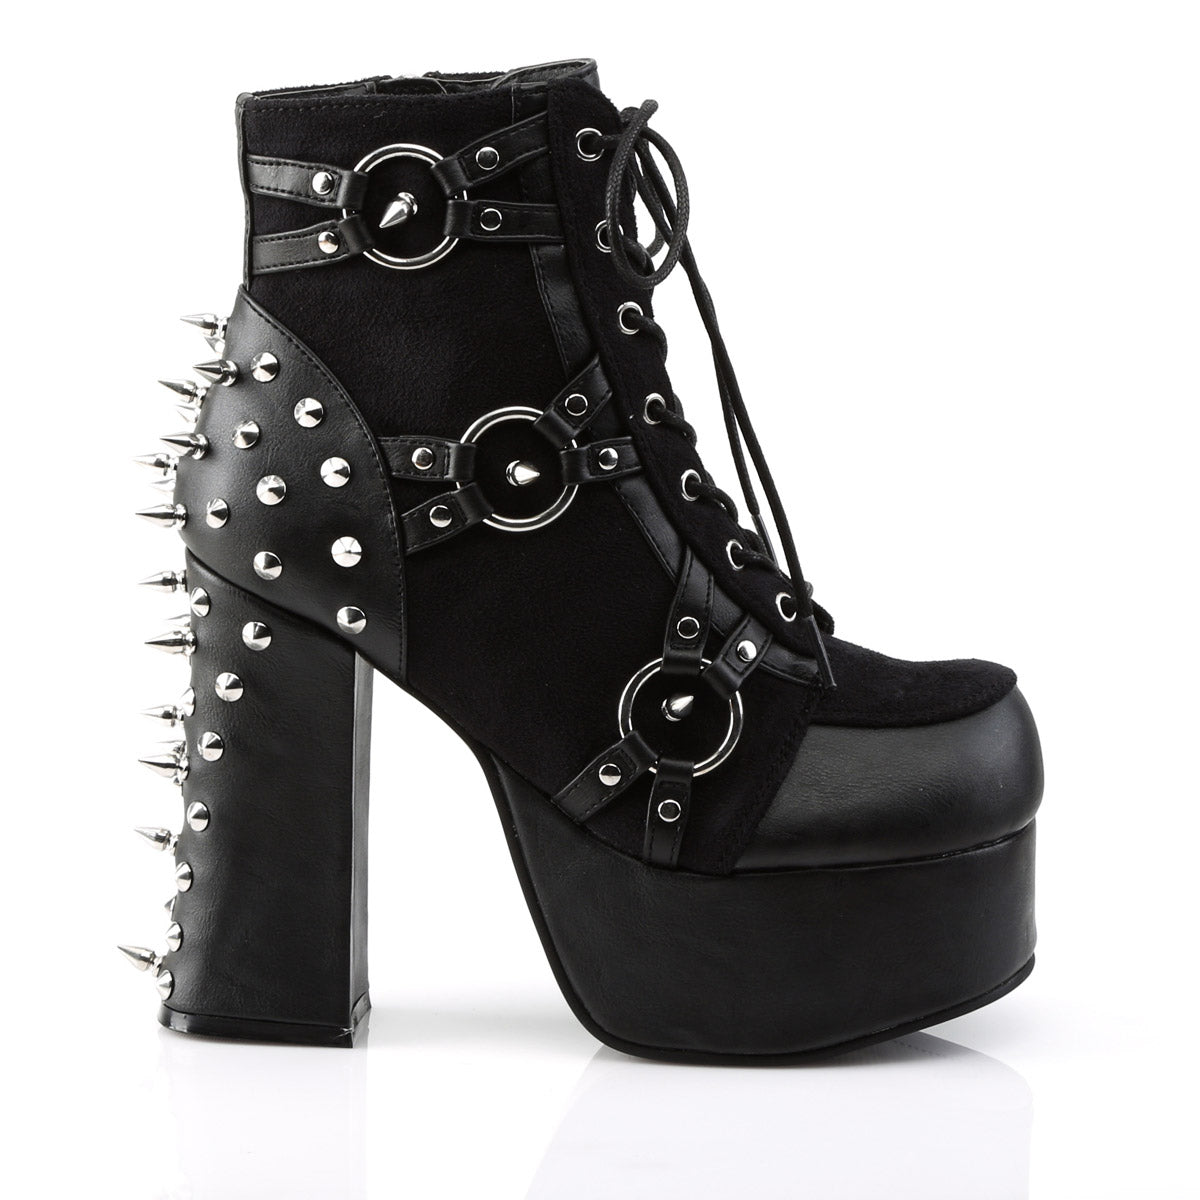 4 1/2" Heel, 2" PF Lace-Up Front Ankle Boot w/ Studs Blk Vegan Leather-Suede Pleaser Demonia CHARADE/100